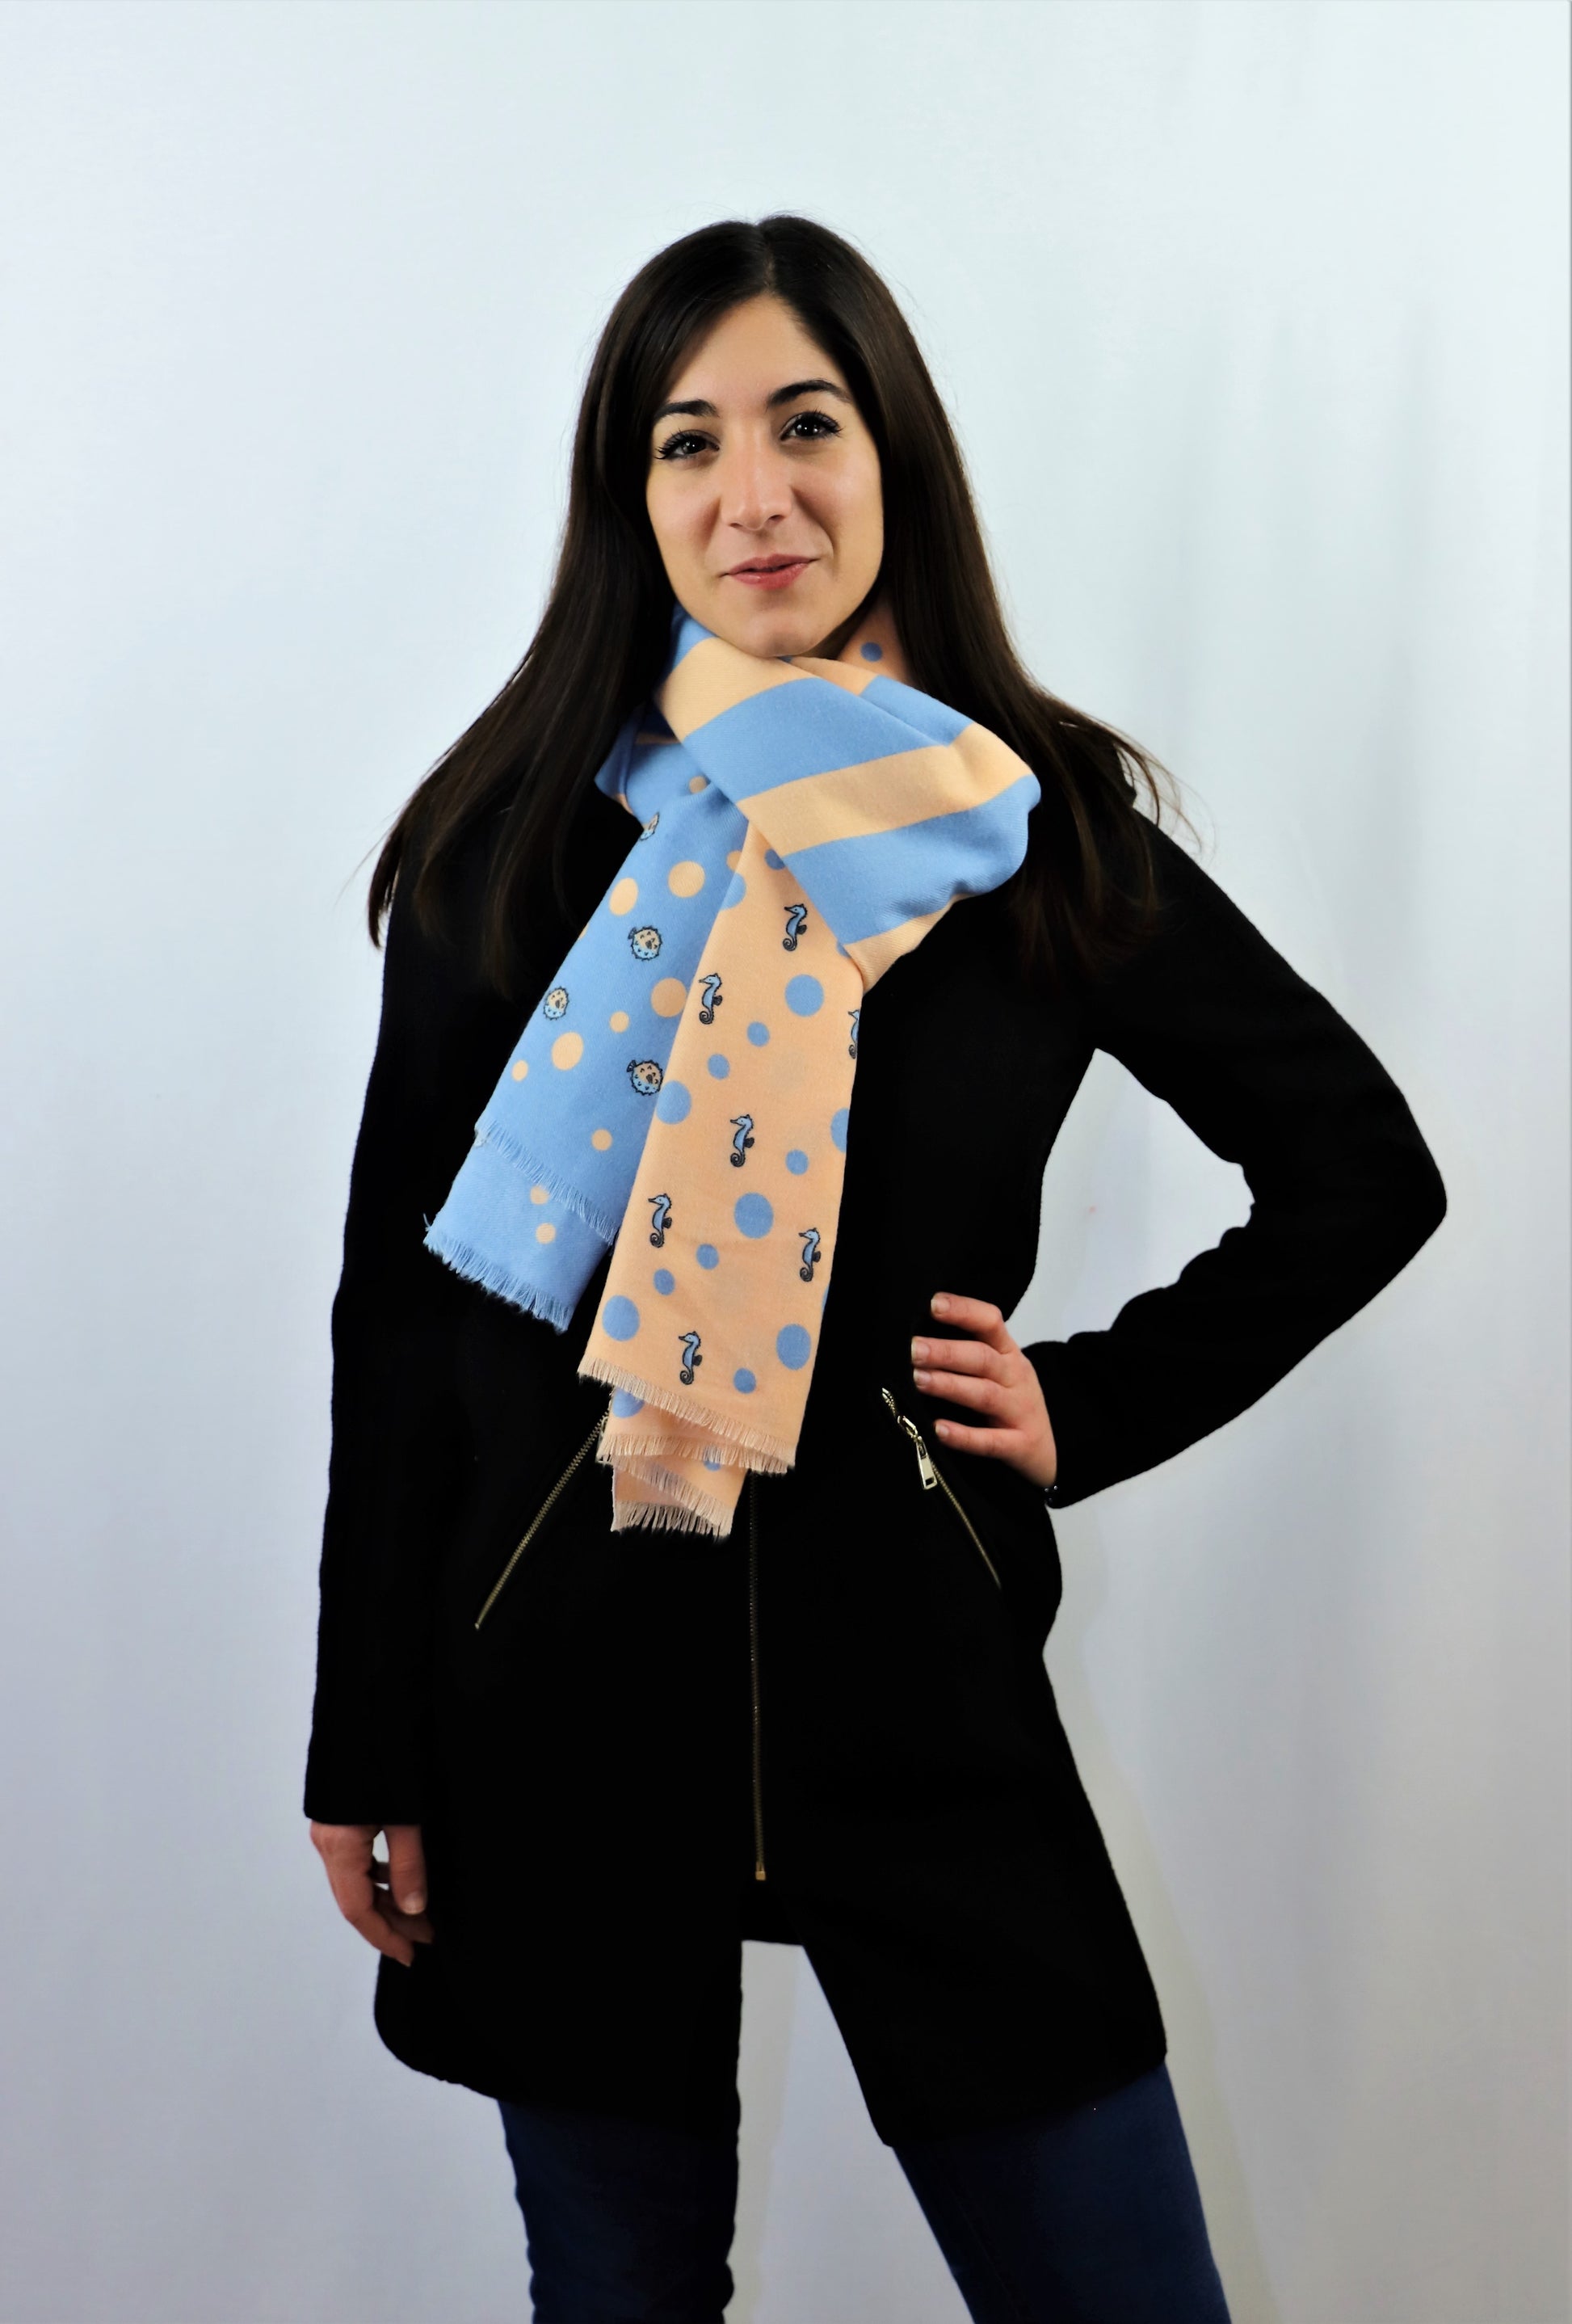 This is a warm and soft cotton scarf for women in beige and blue in unique marine, ocean patterns with fish and seahorse design made from a special cotton blend that gives you a wonderful cashmere-like feeling without hurting animals. This is a vegan and cruelty-free scarf certified by PETA and a perfect gift idea for women.